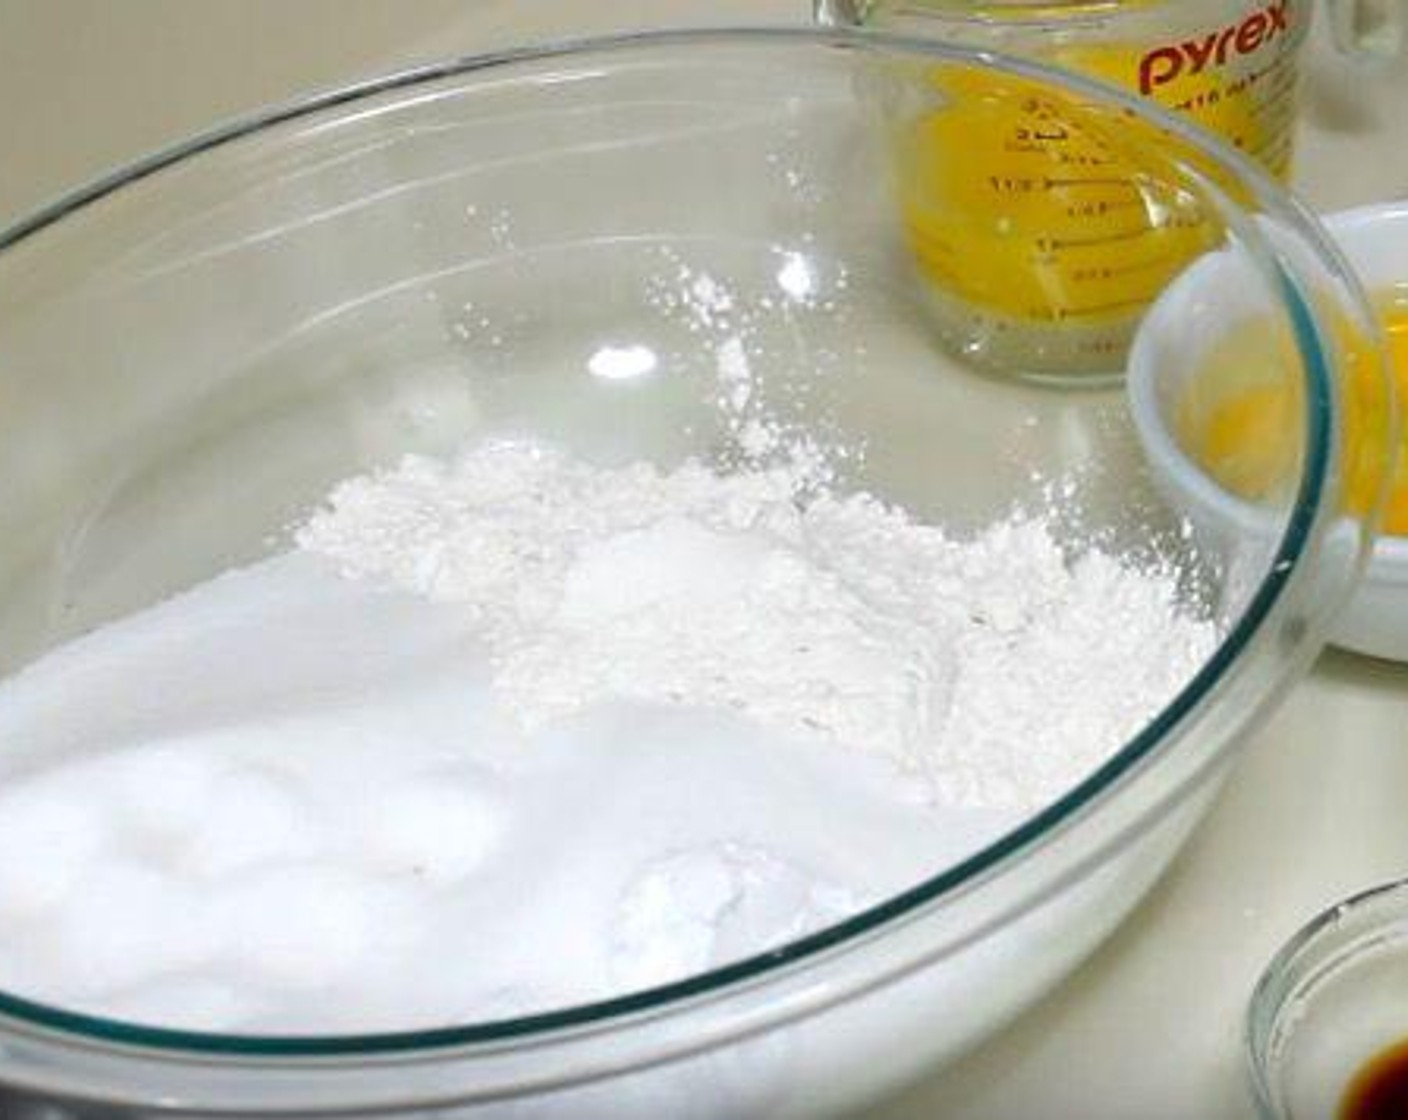 step 1 In a mixing bowl, add All-Purpose Flour (2 3/4 cups), Granulated Sugar (2 cups), Salt (1/2 tsp), Baking Soda (1/2 tsp), and Baking Powder (1/2 Tbsp). Whisk together and set aside.